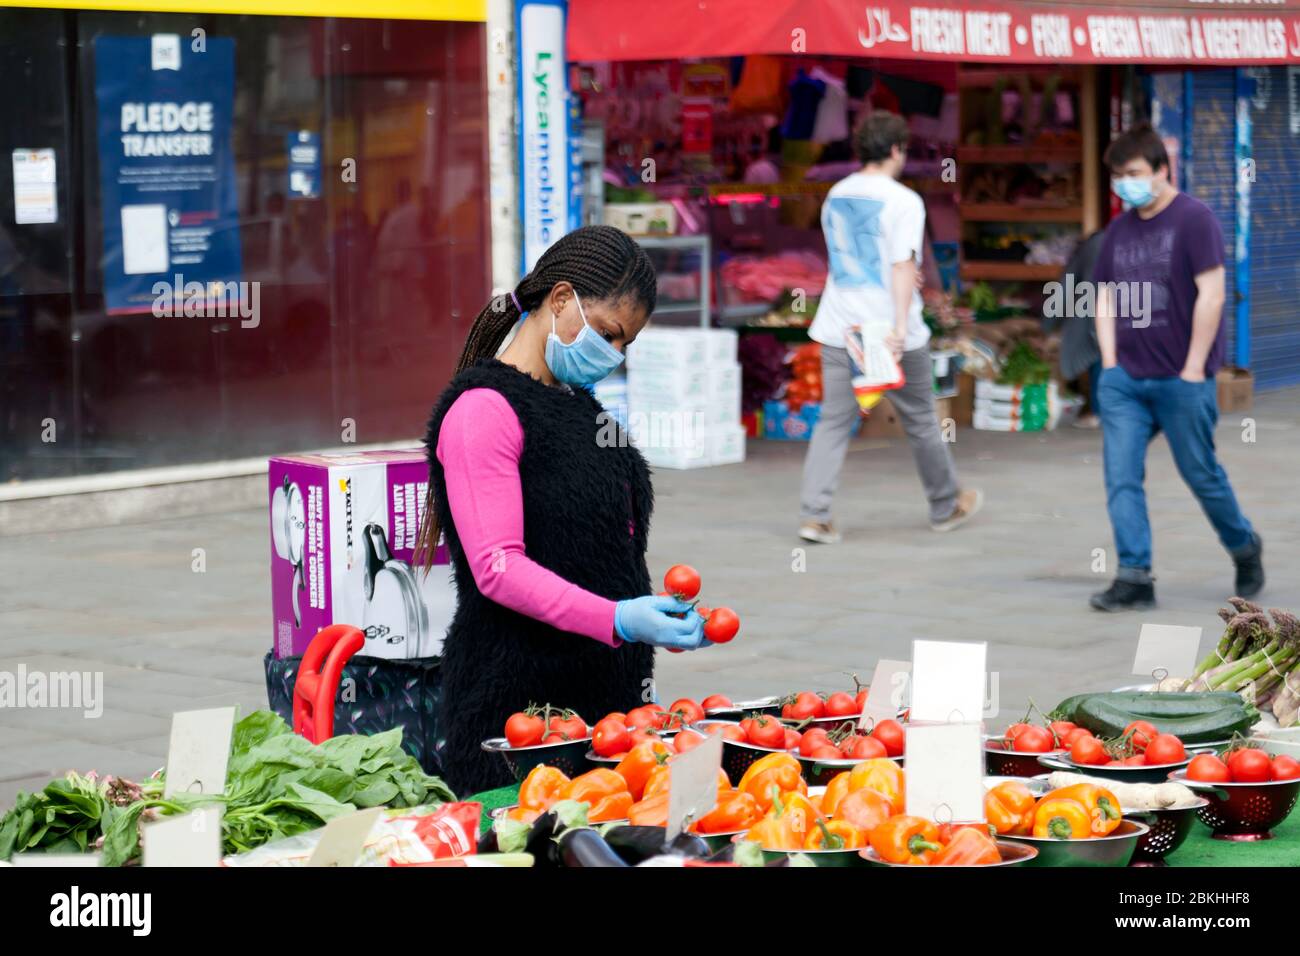 Stall-holder in Lewisham Market, wearing a Face Mask and inspecting her tomatoes, during the COVID-19 Pandemic, Lewisham High Street Stock Photo